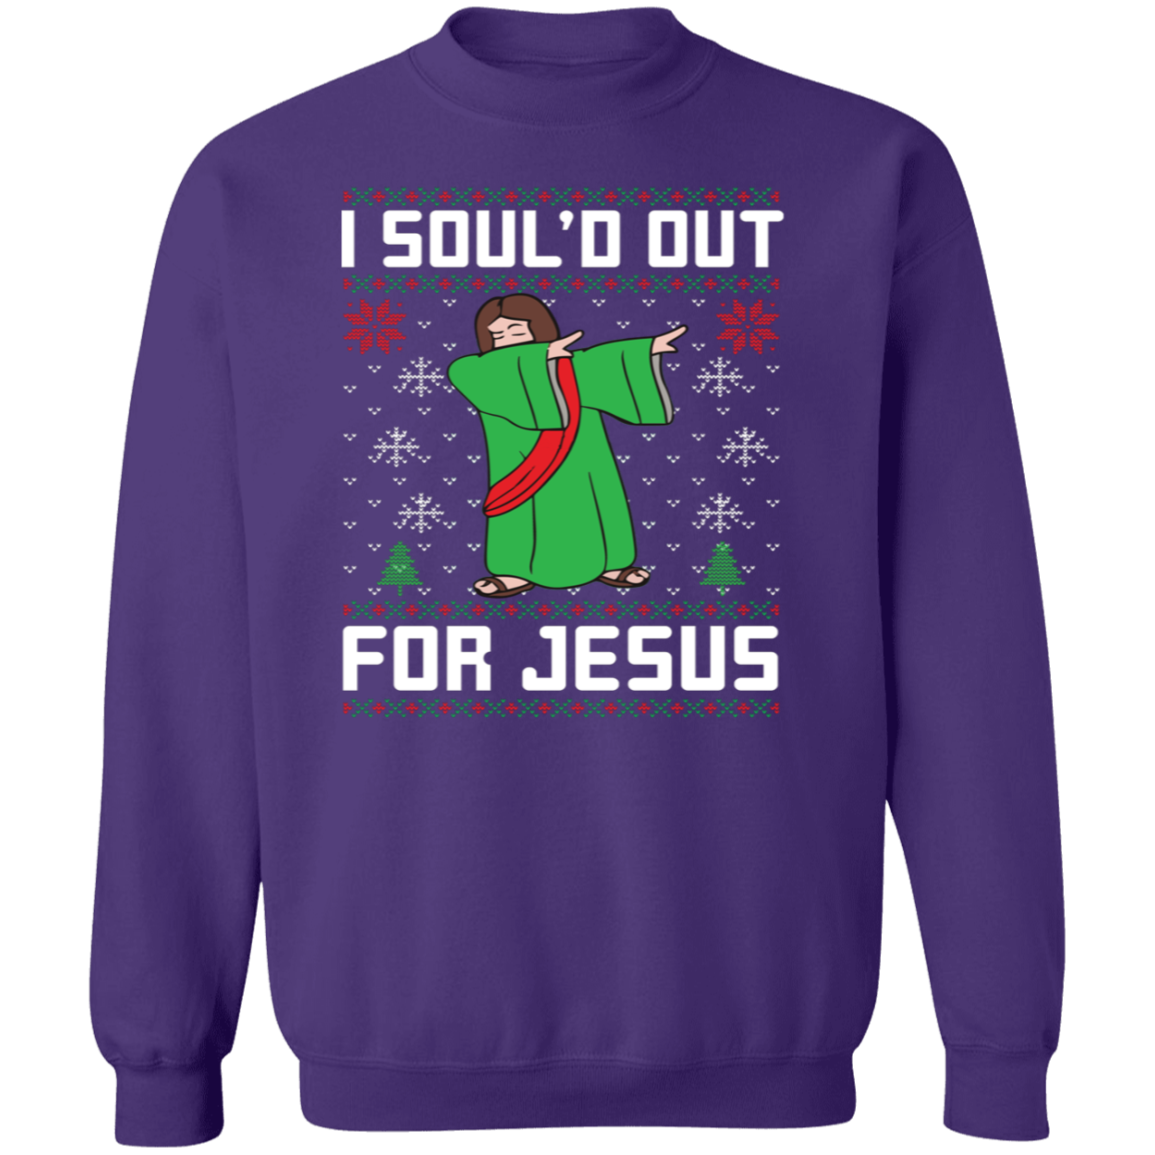 I Soul'D Out For Jesus - Unisex Ugly Sweater, Christmas, Winter, Fall